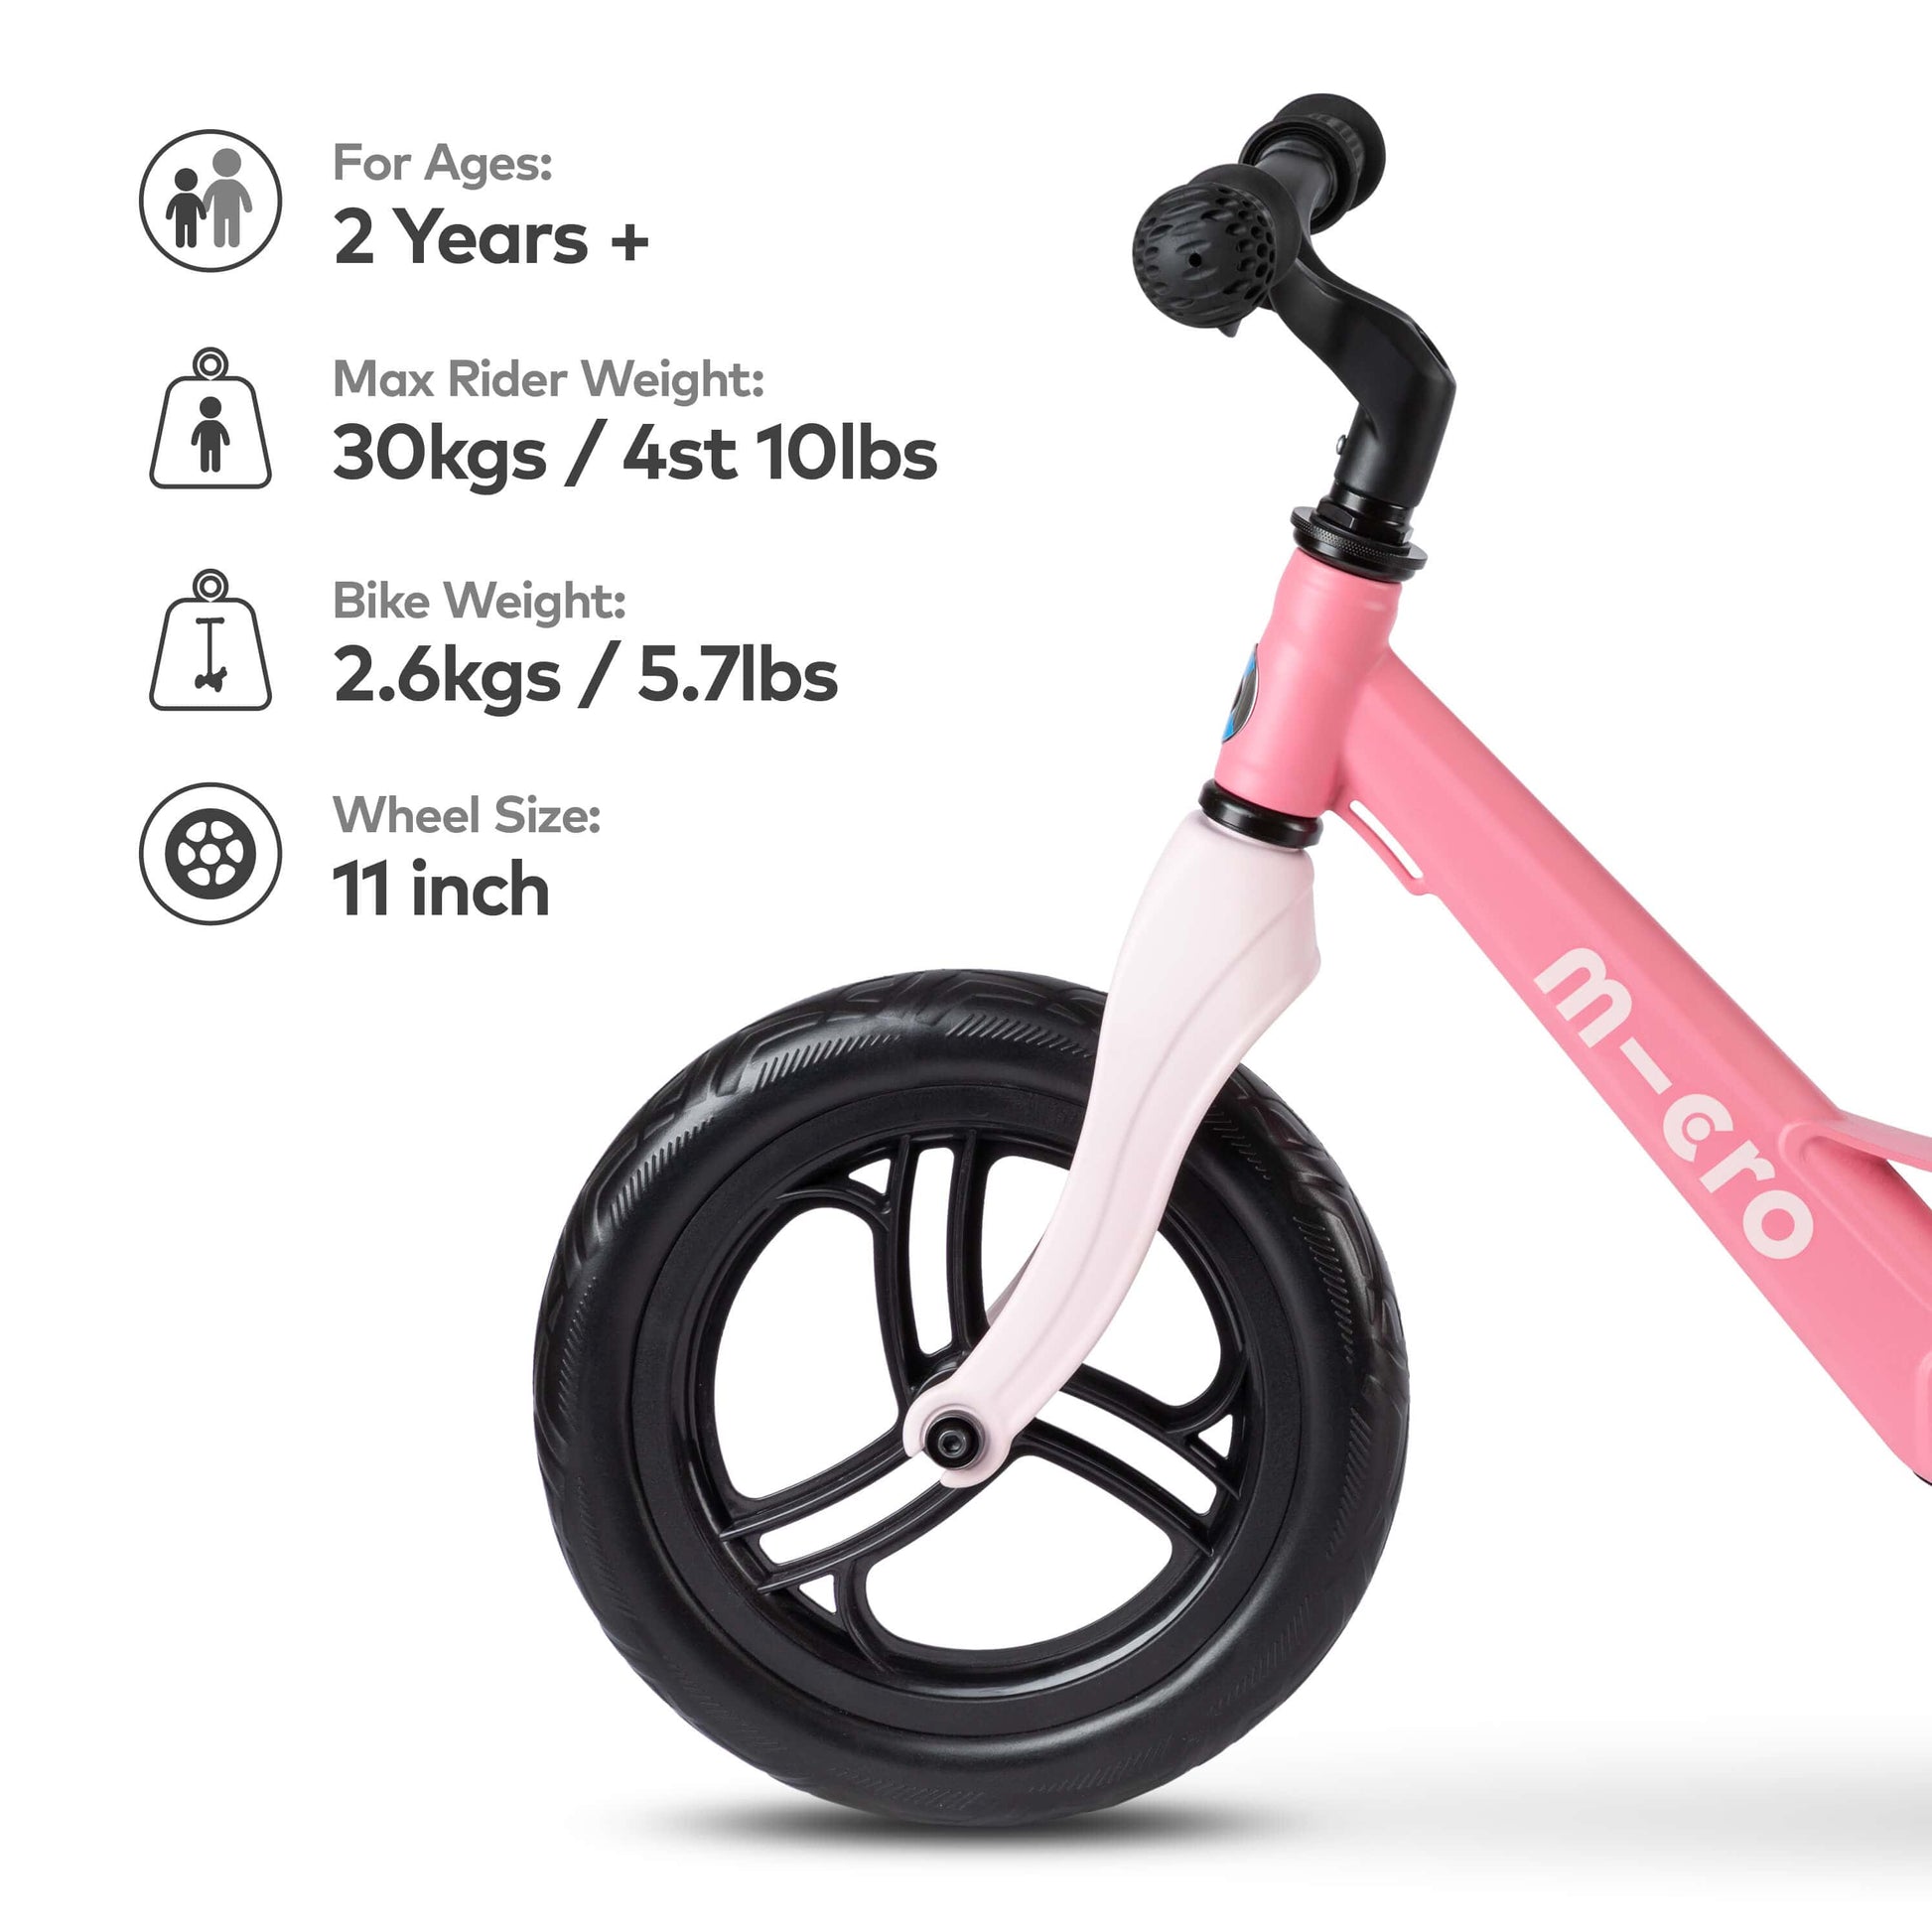 Micro Scooter Balance Bike Lite Pink size and weight guide